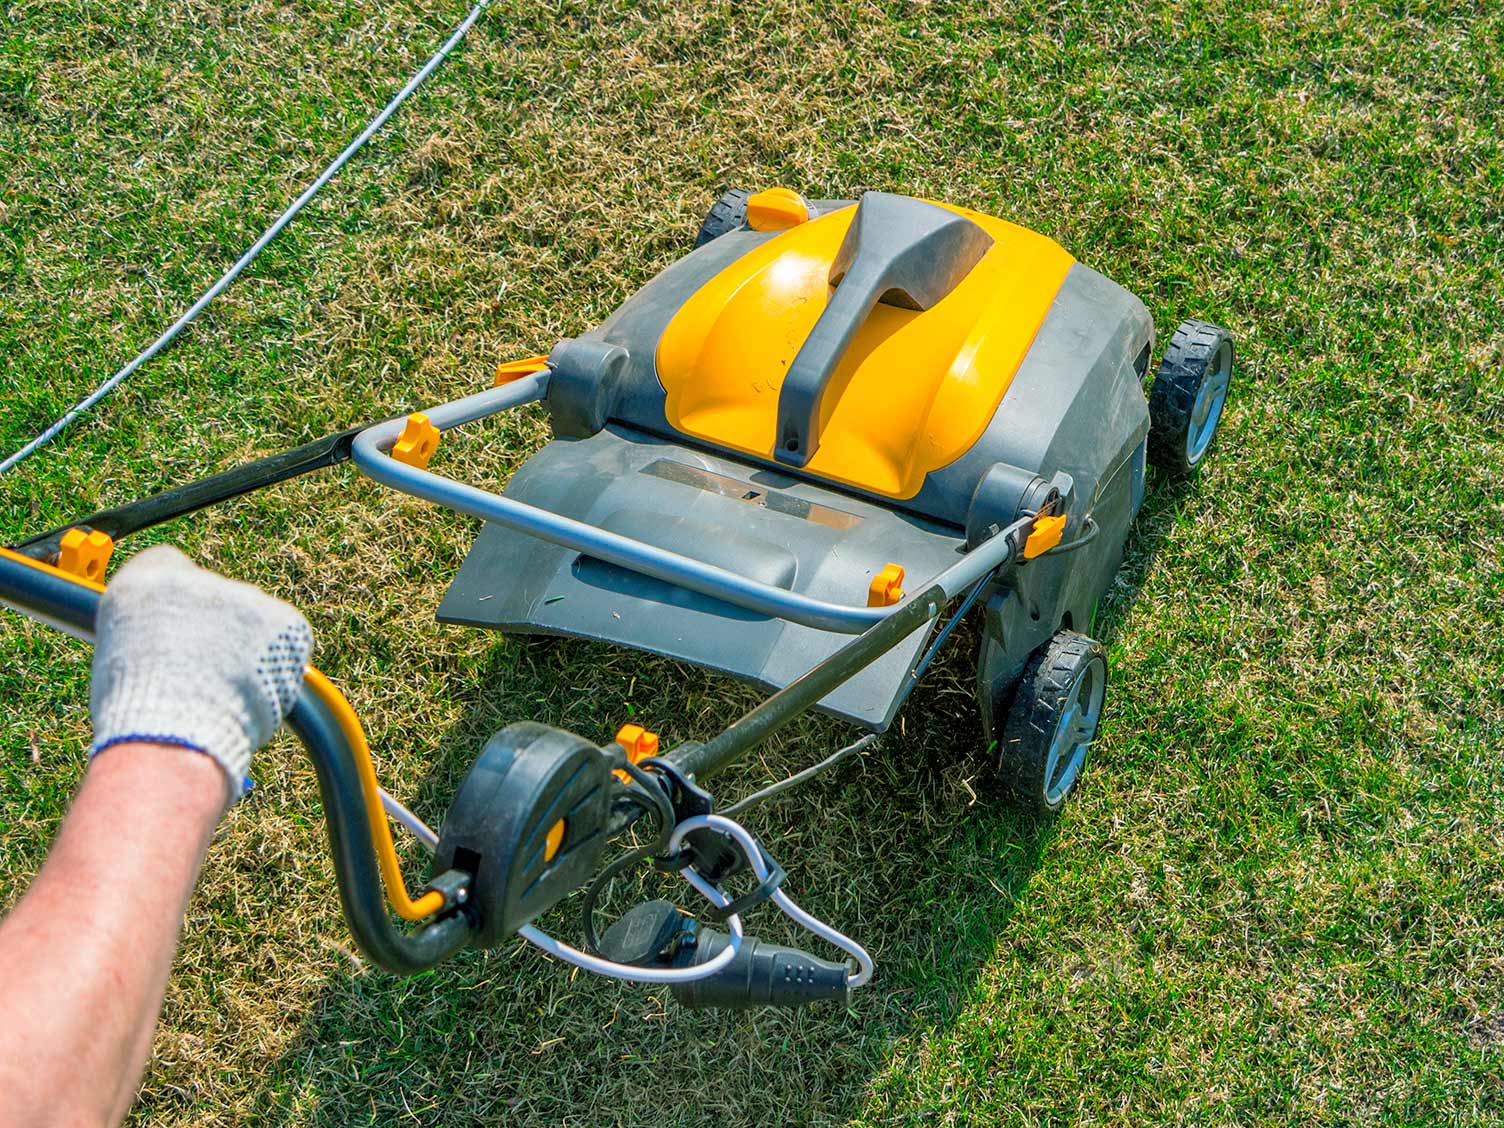  What a lawn scarifier is, and how to use it